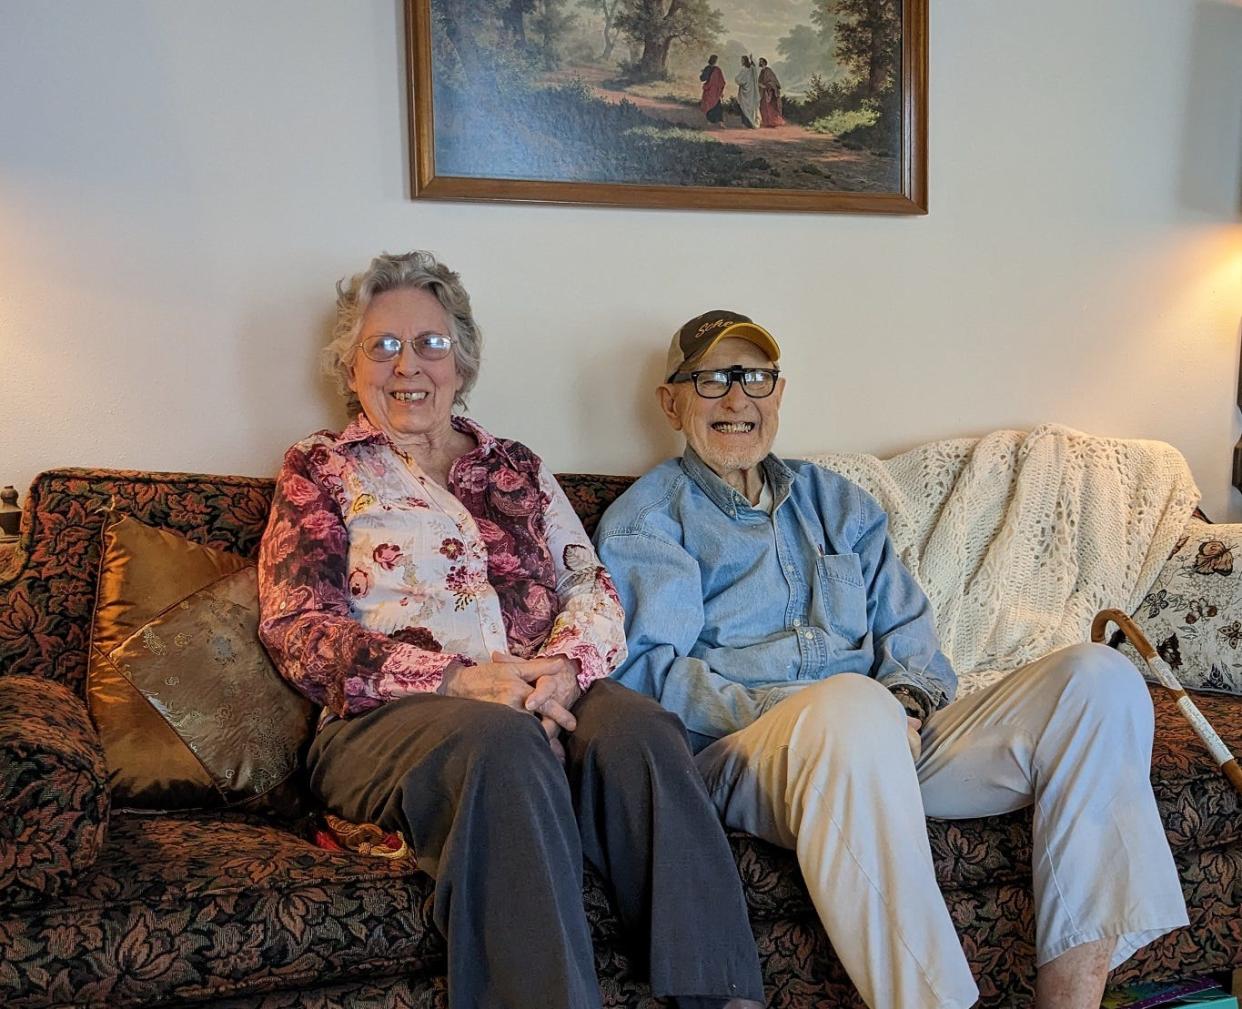 Iley and Frank Petereit, both 92, pictured in their home in Sioux Falls.